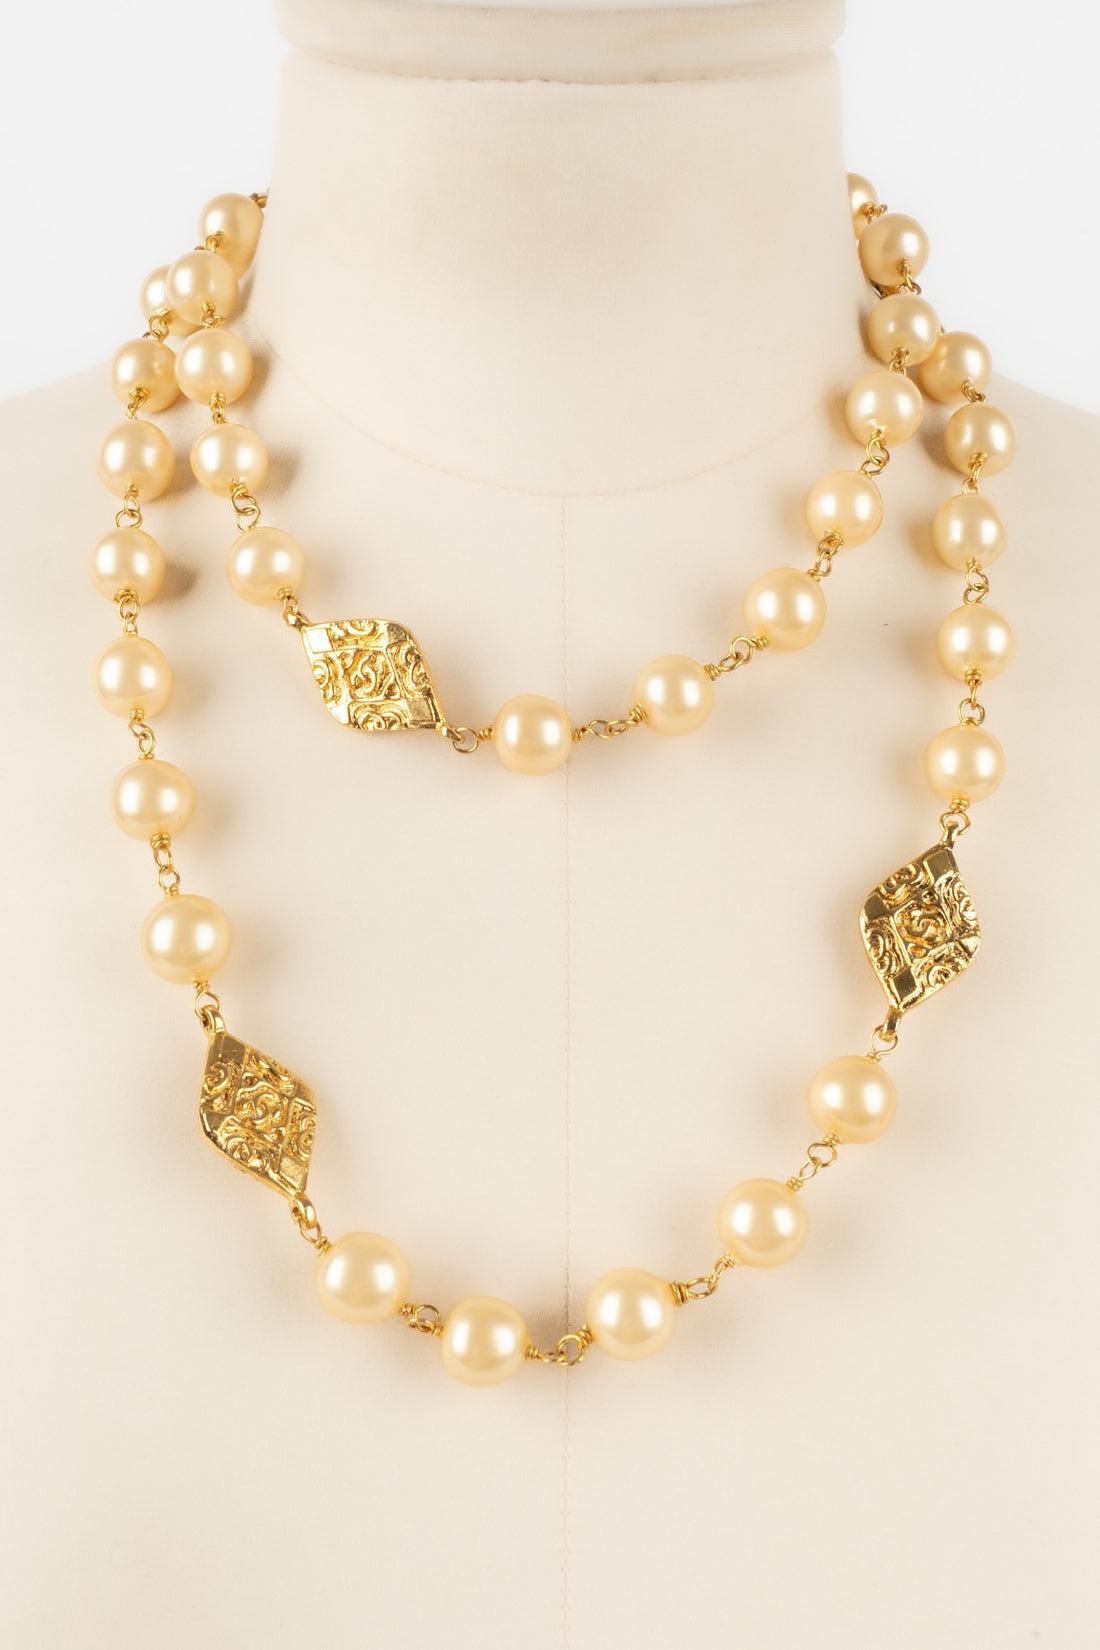 Women's Chanel Costume Pearls Necklace